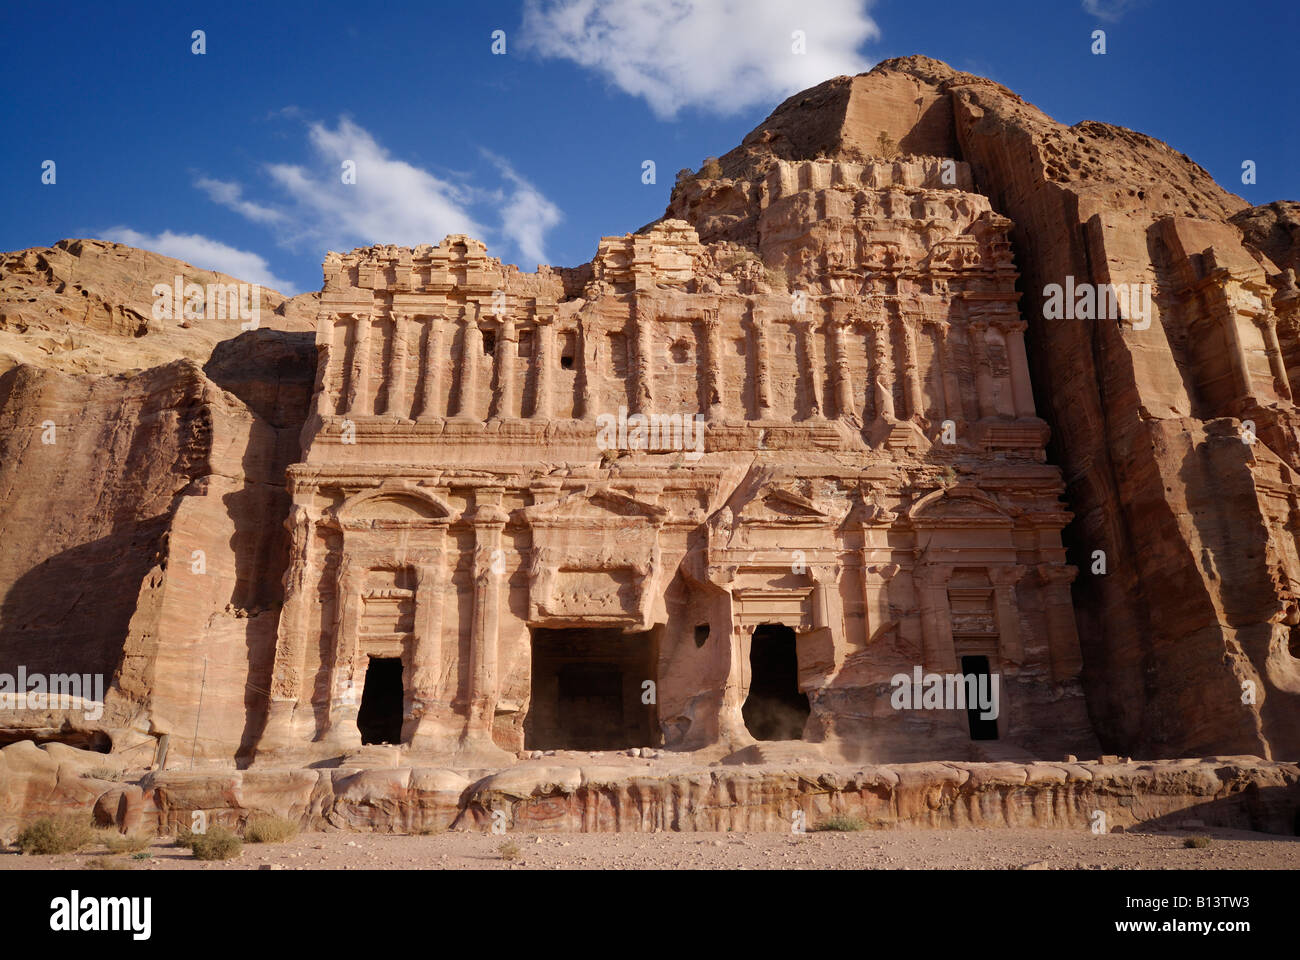 Palace Tomb The Royal Tombs carved out of the west face of al Khubtha mountain Nabataean ancient town Petra Jordan Arabia Stock Photo